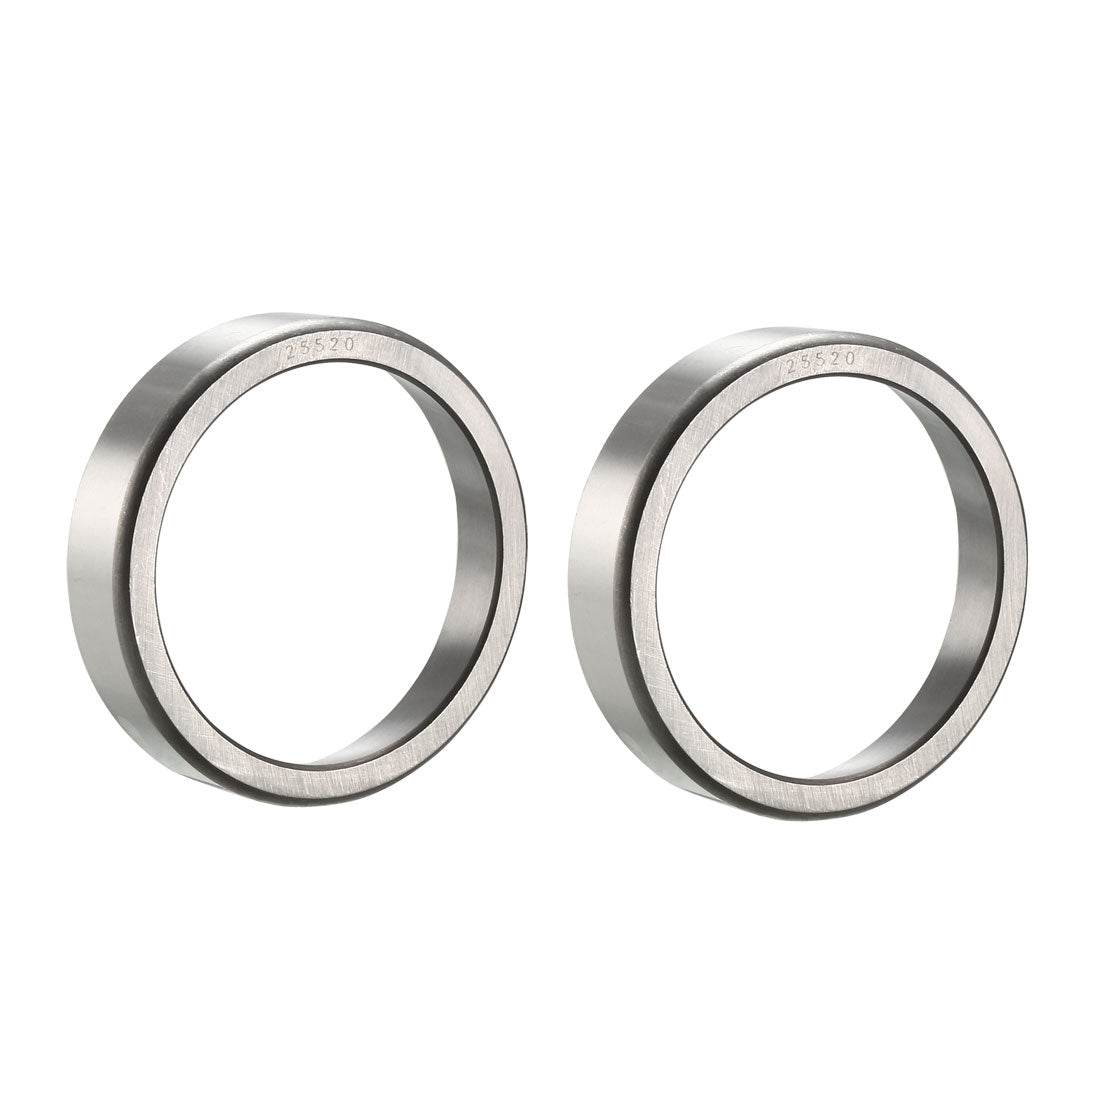 Uxcell Uxcell 25520 Tapered Roller Bearing Outer Race Cup 3.265" O.D., 0.75" Width 2pcs